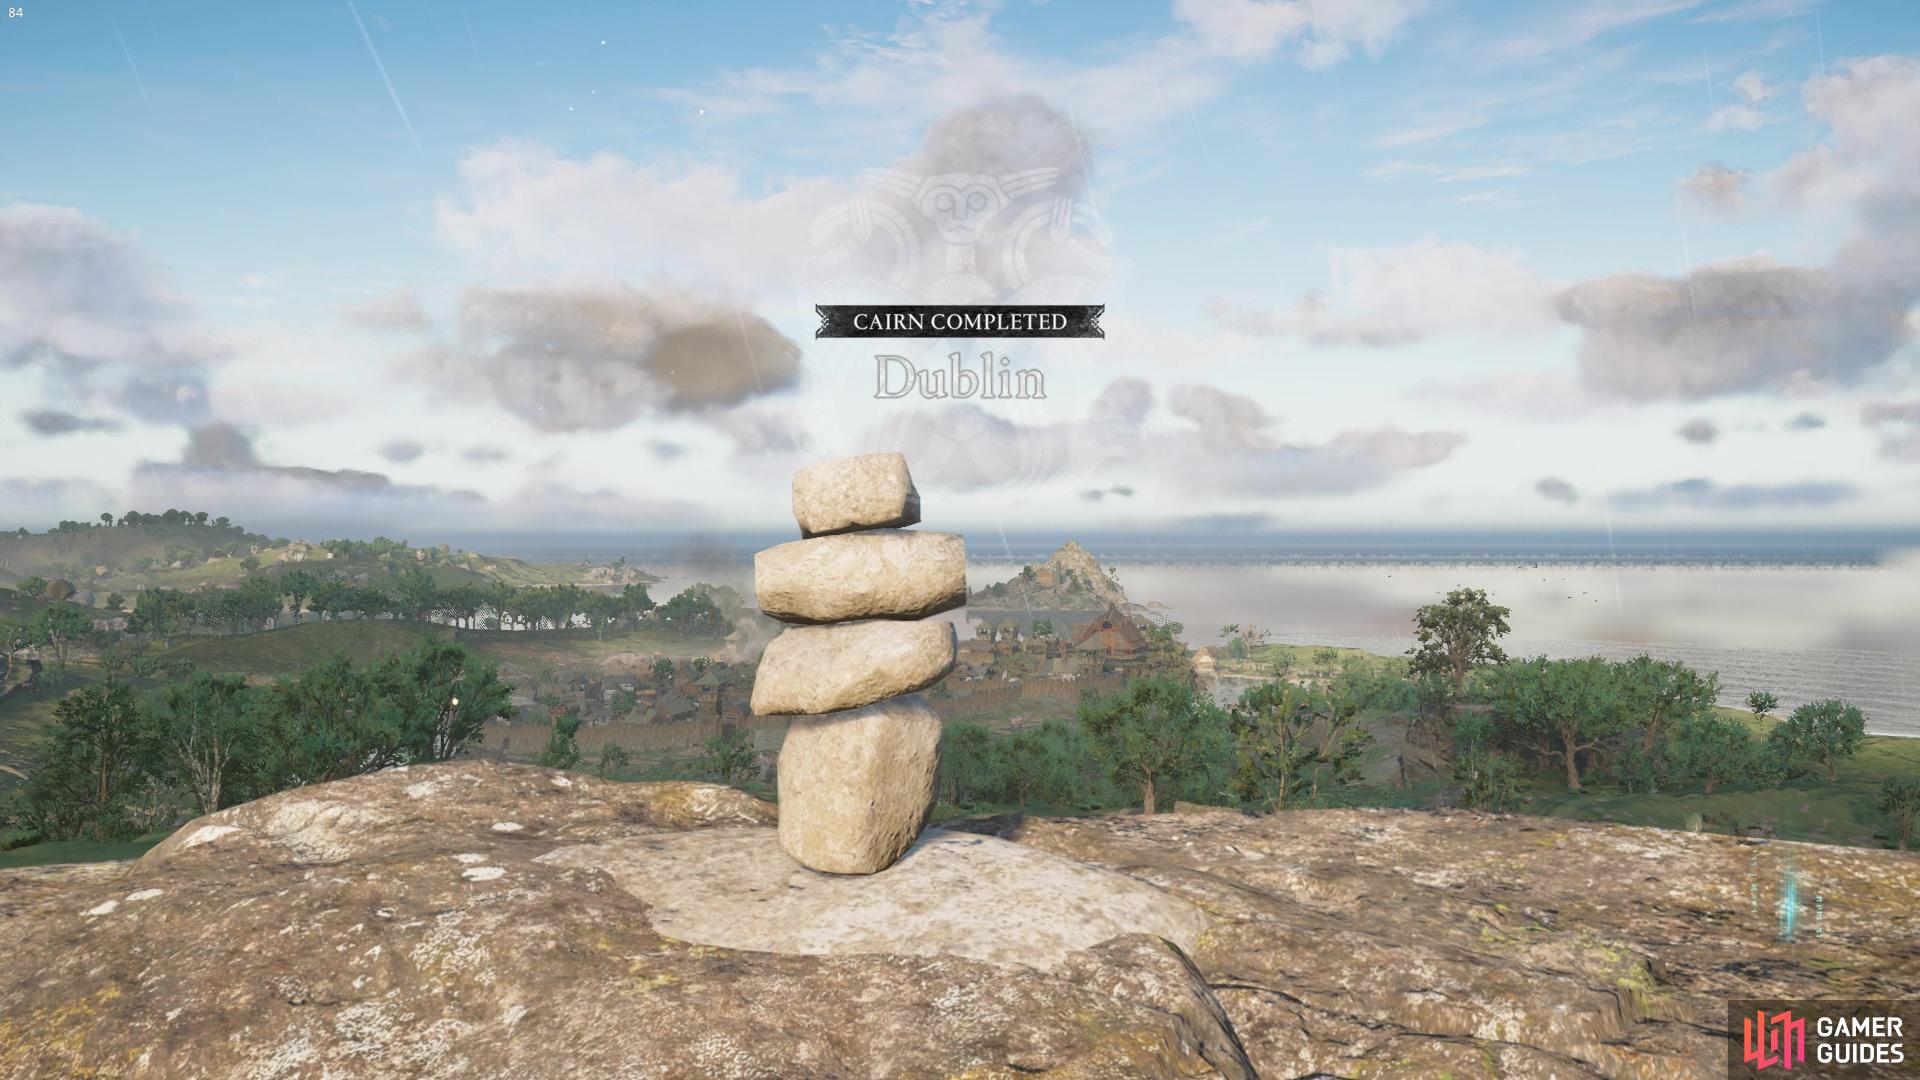 Finally, gently place the smallest rock on top.